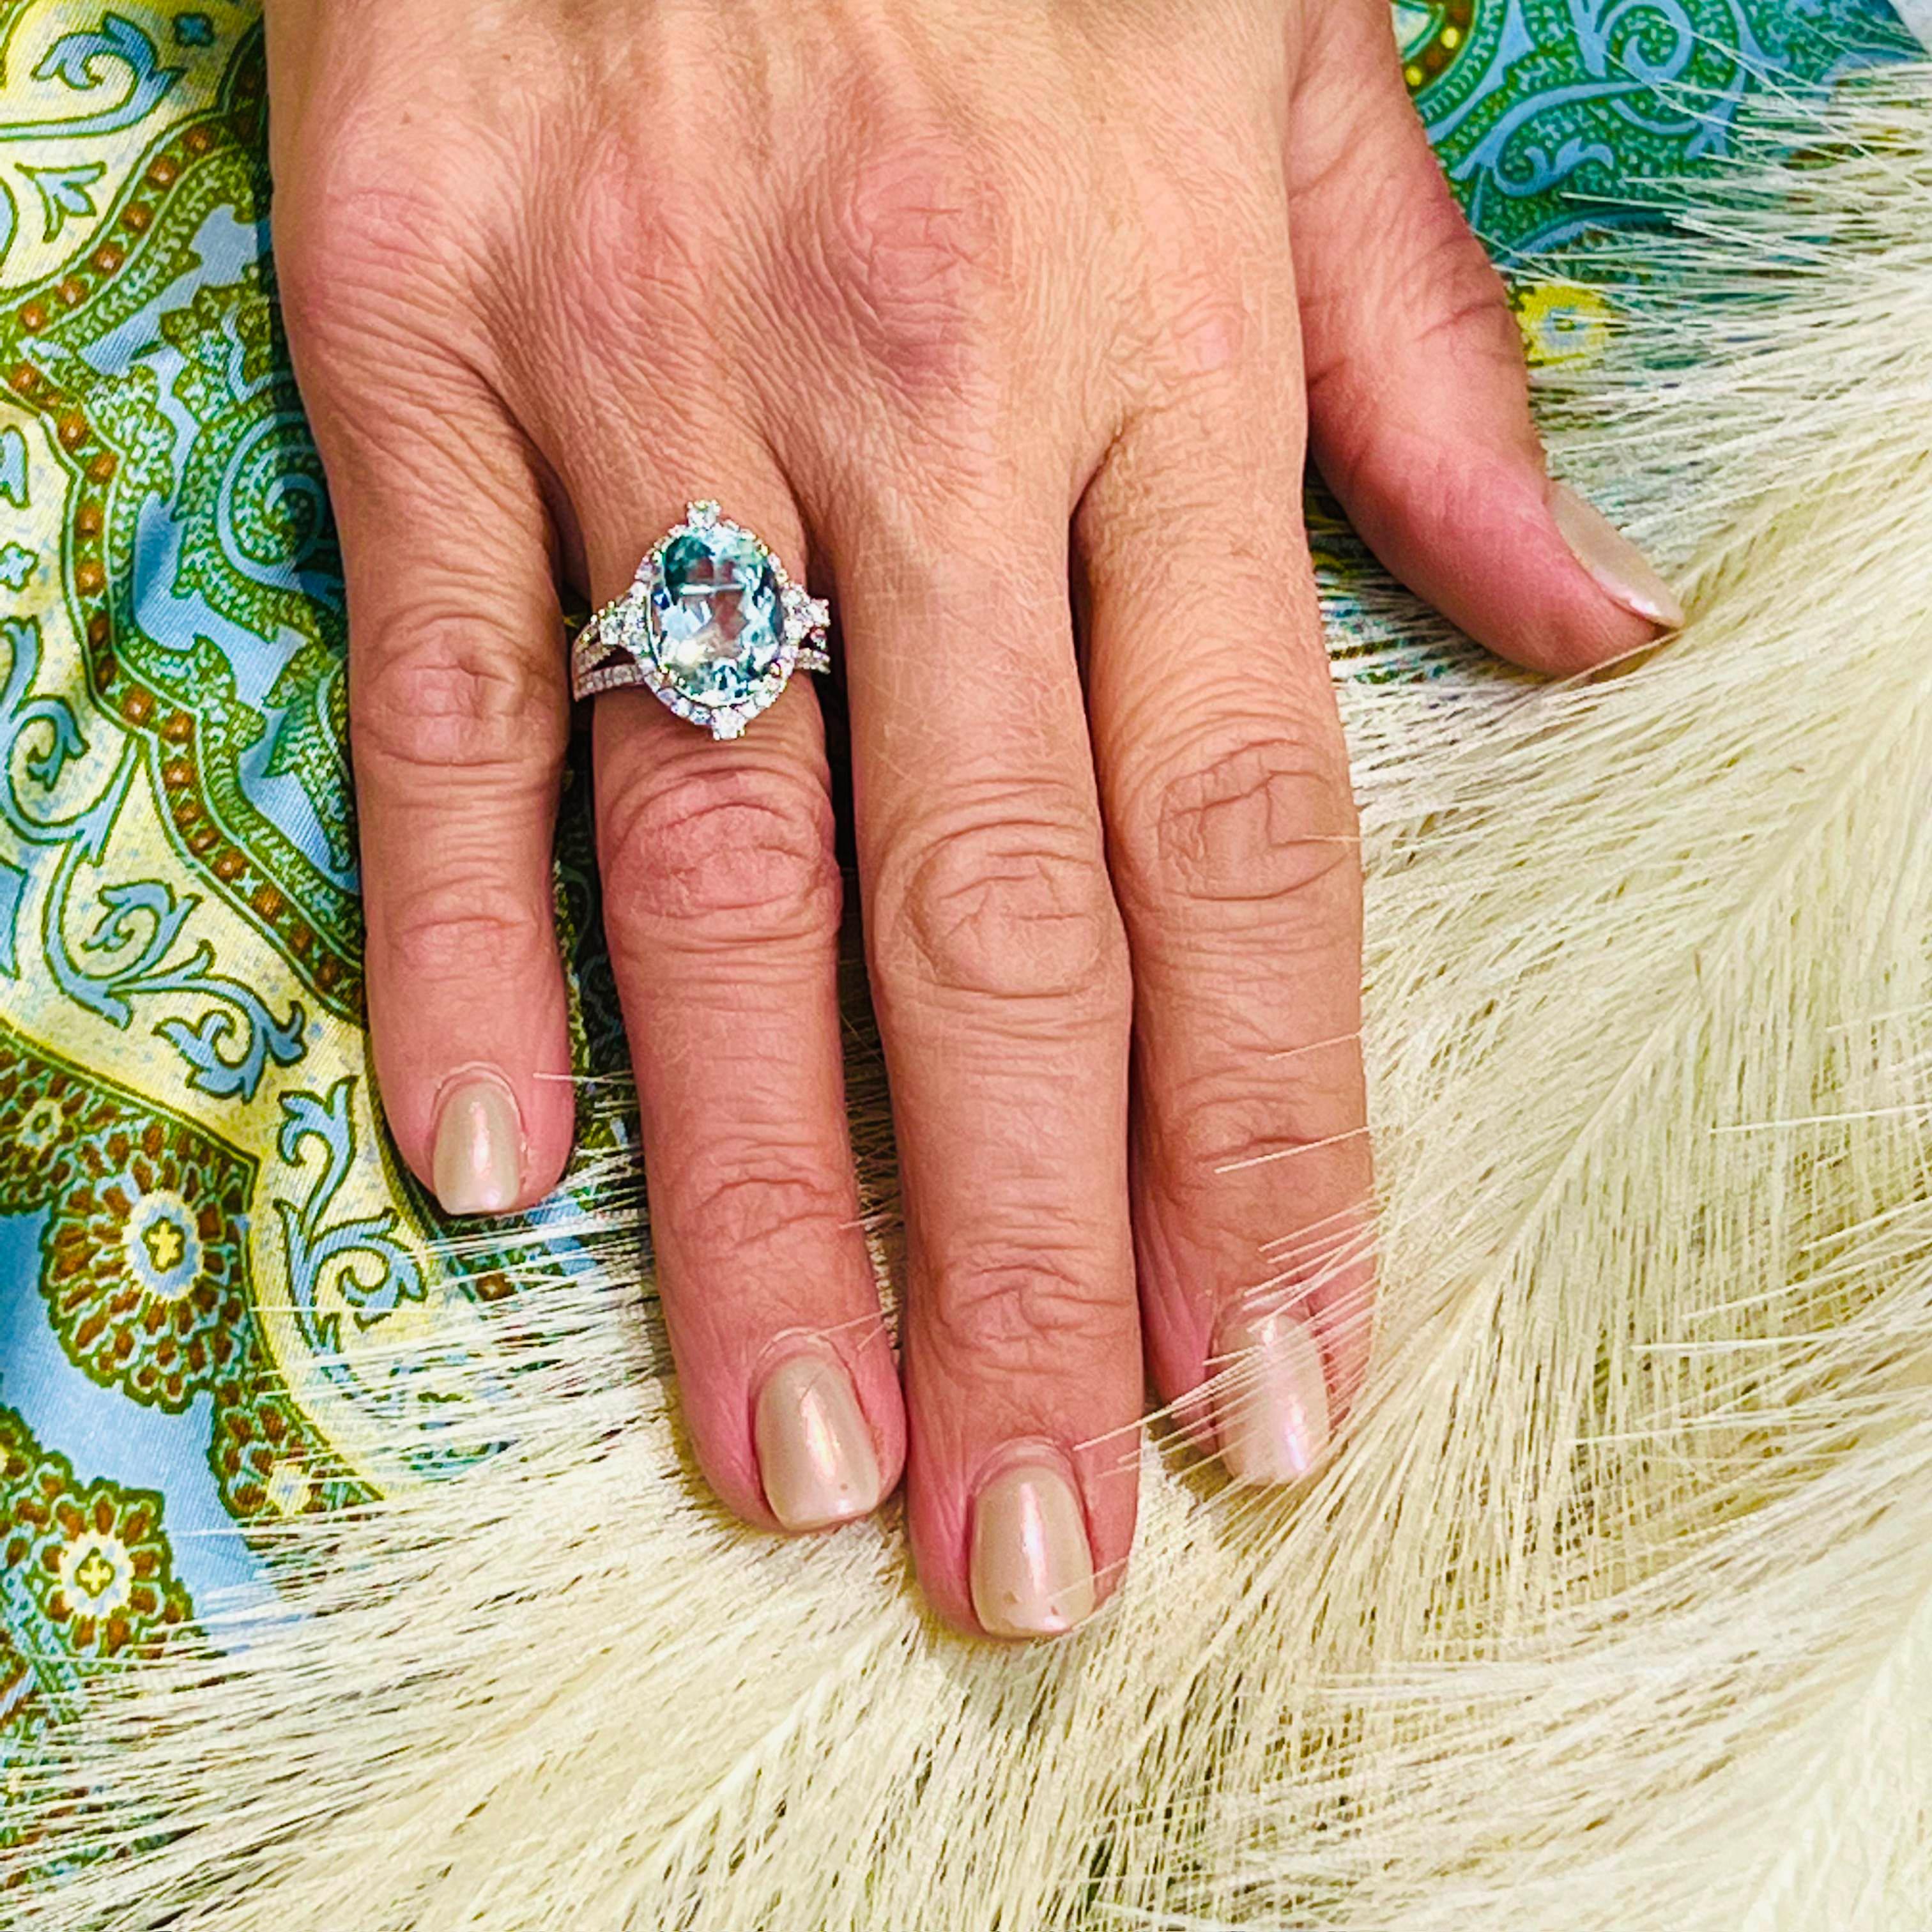 Natural Aquamarine Diamond Ring Size 6.5 14k W Gold 6.58 TCW Certified $5,975 217093

This is a Unique Custom Made Glamorous Piece of Jewelry!

Nothing says, “I Love you” more than Diamonds and Pearls!

This Aquamarine ring has been Certified,